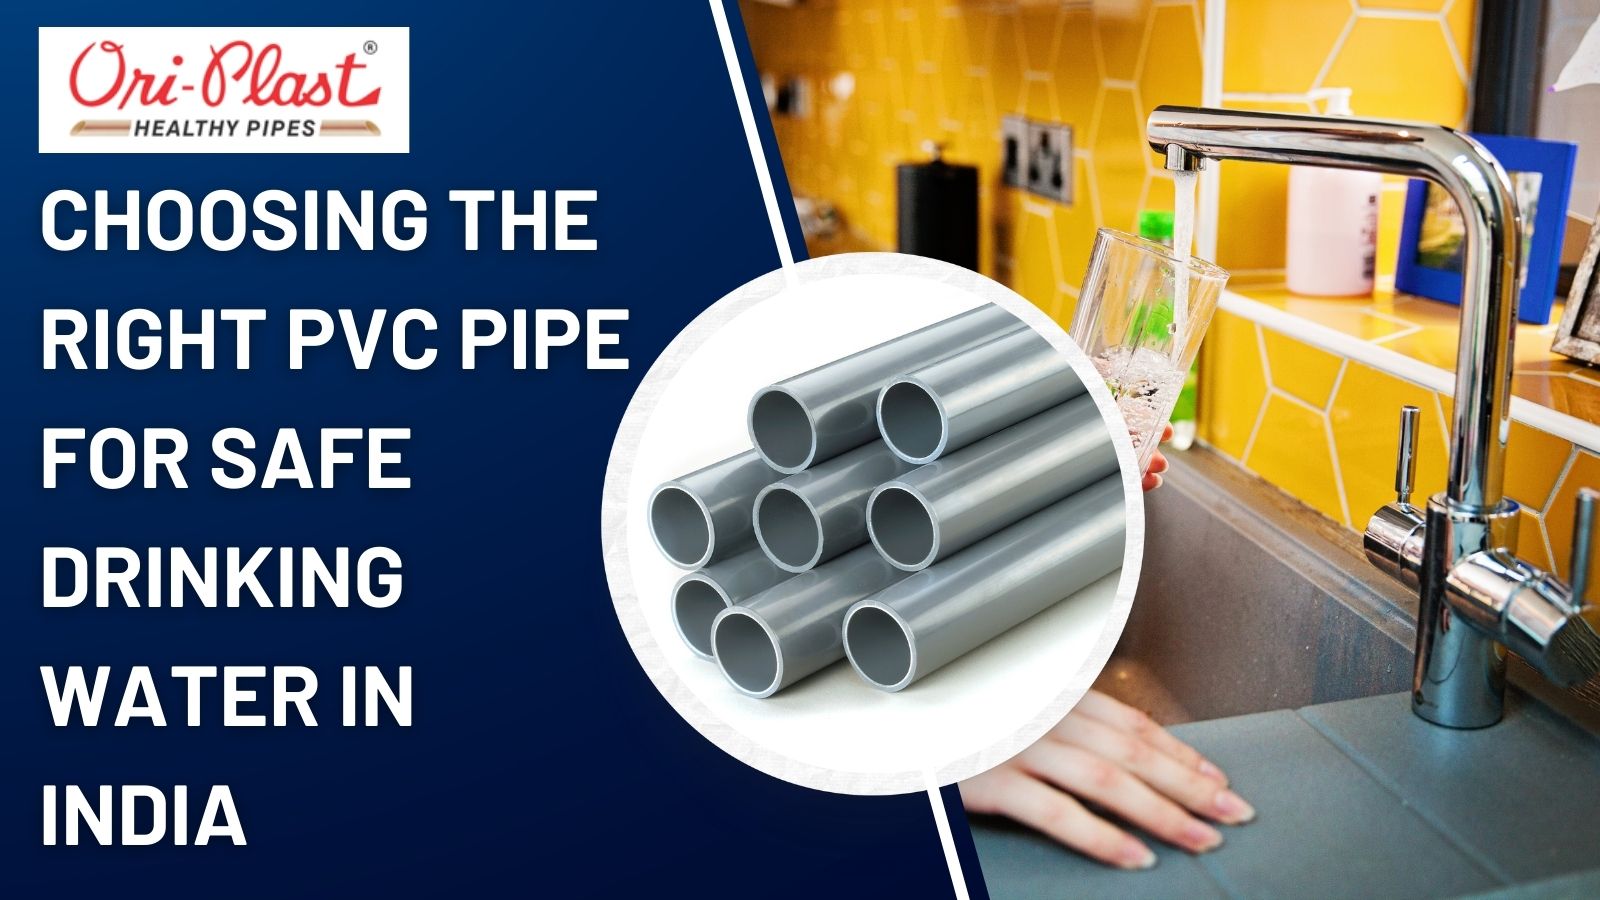 Choosing the Right PVC Pipe for Safe Drinking Water in India